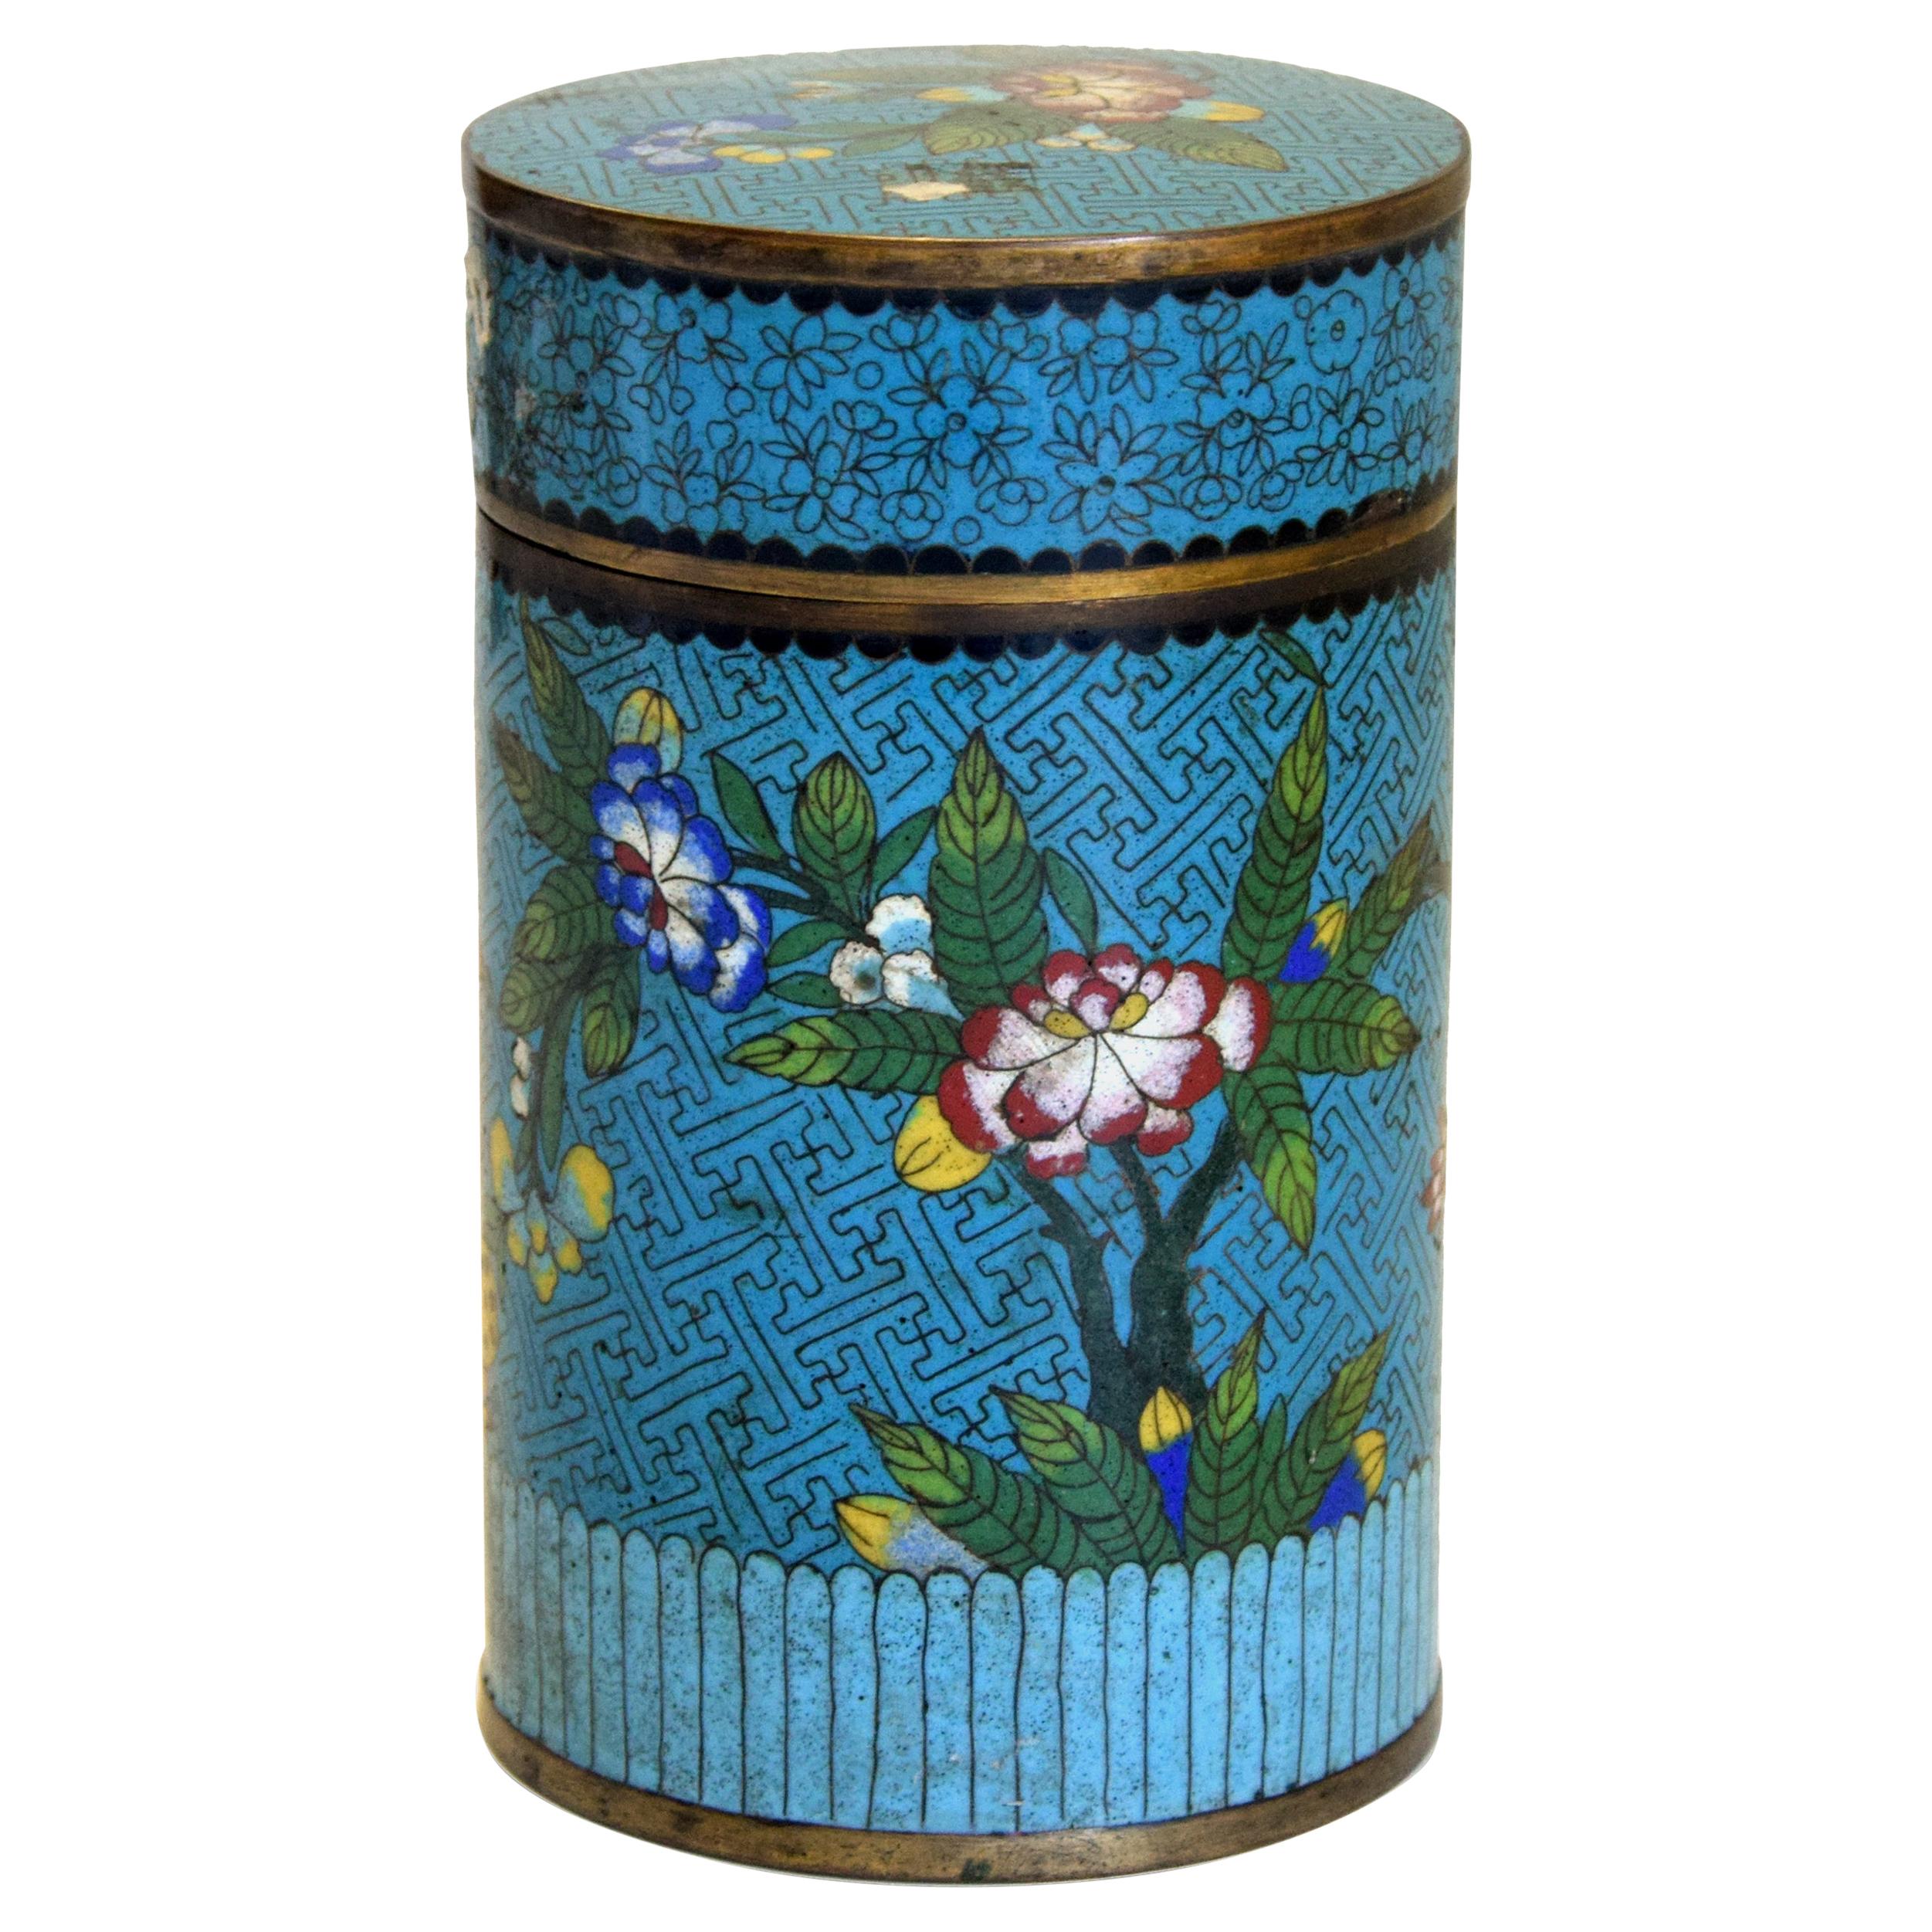 Vintage Chinese Cloisonné Box, Early 20th Century